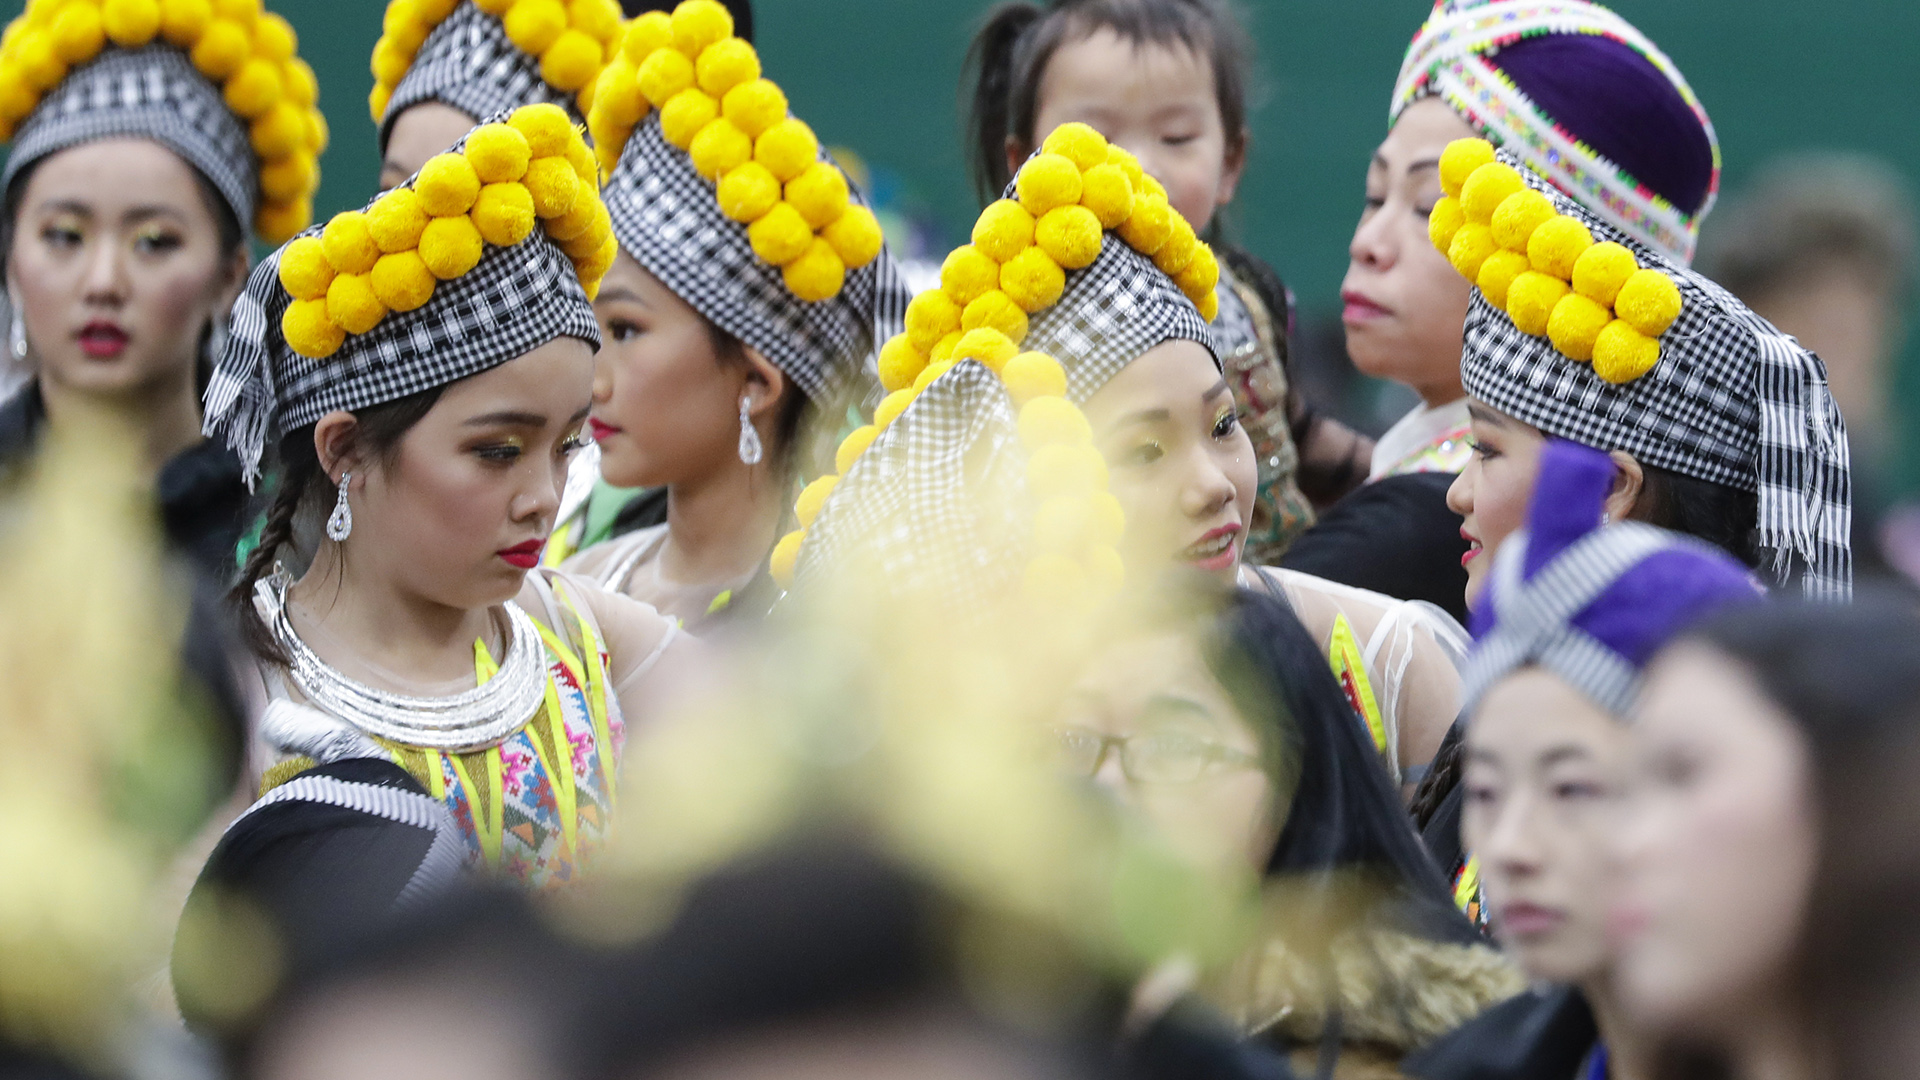 Performers wearing traditional headwear and other costume elements are crowded together in a room.